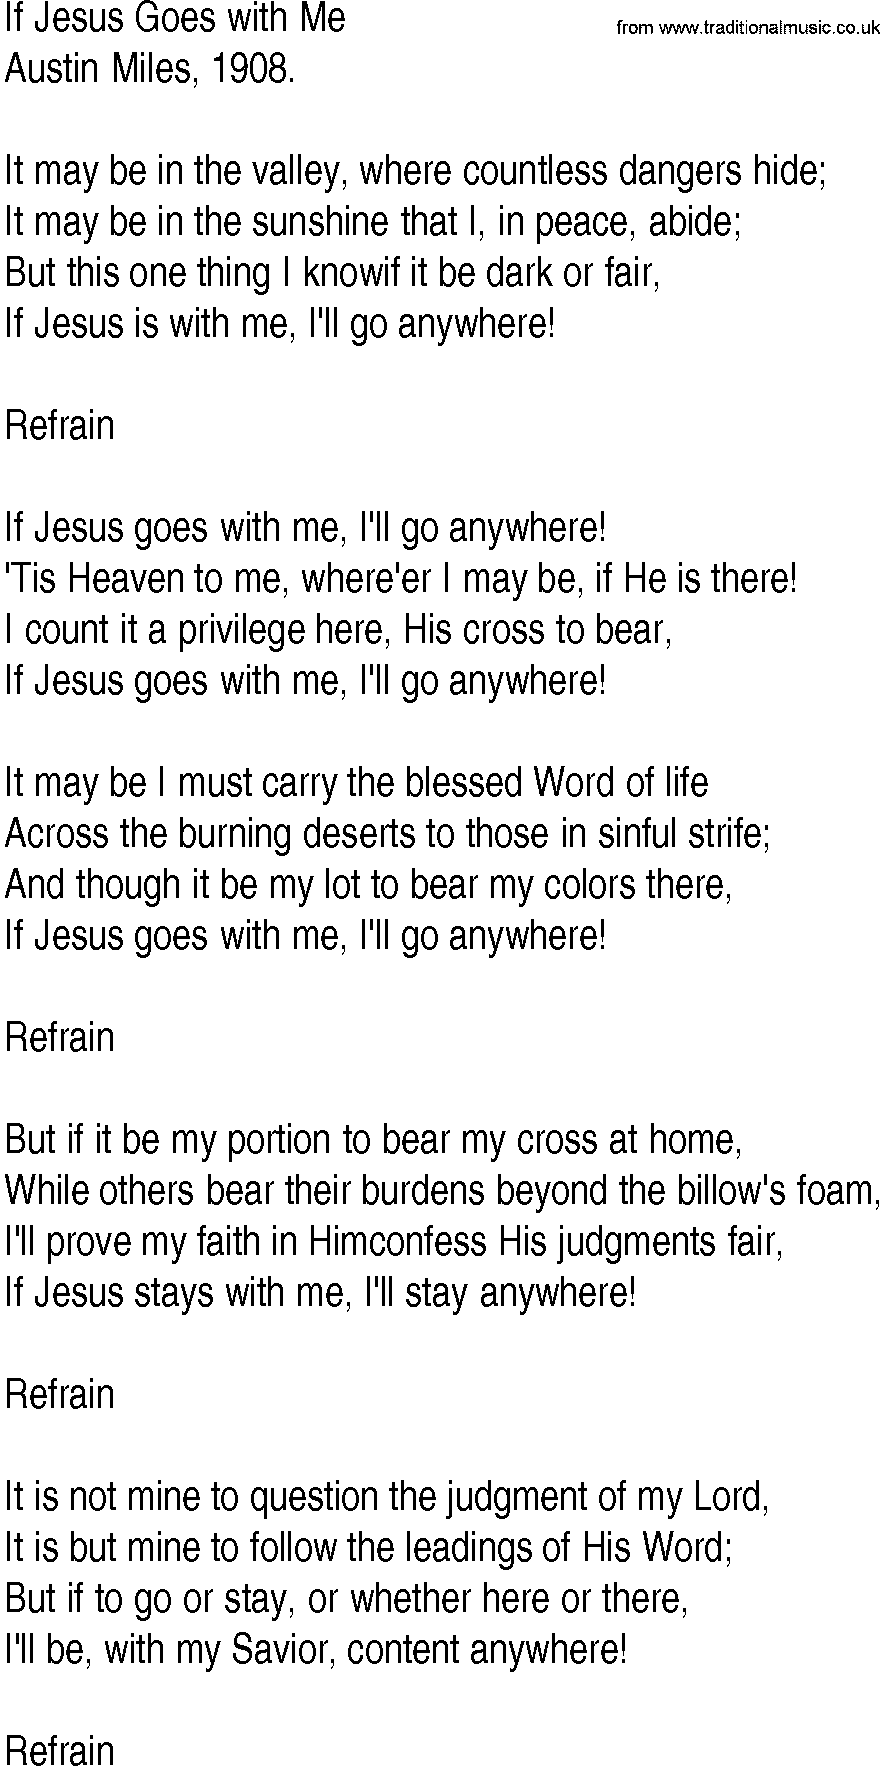 Hymn and Gospel Song: If Jesus Goes with Me by Austin Miles lyrics